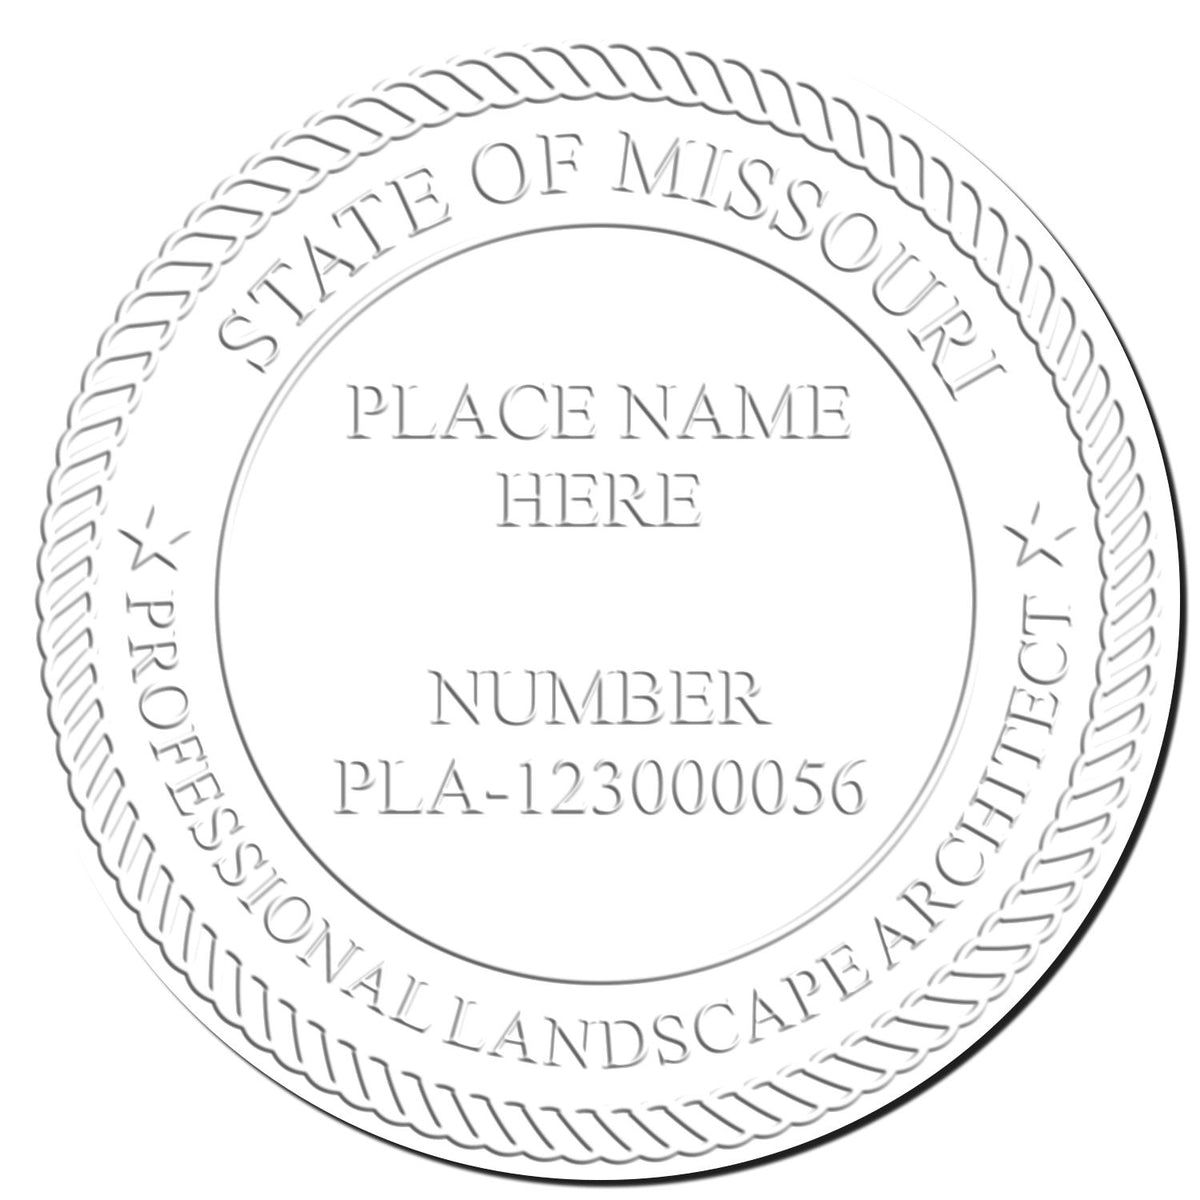 This paper is stamped with a sample imprint of the Gift Missouri Landscape Architect Seal, signifying its quality and reliability.